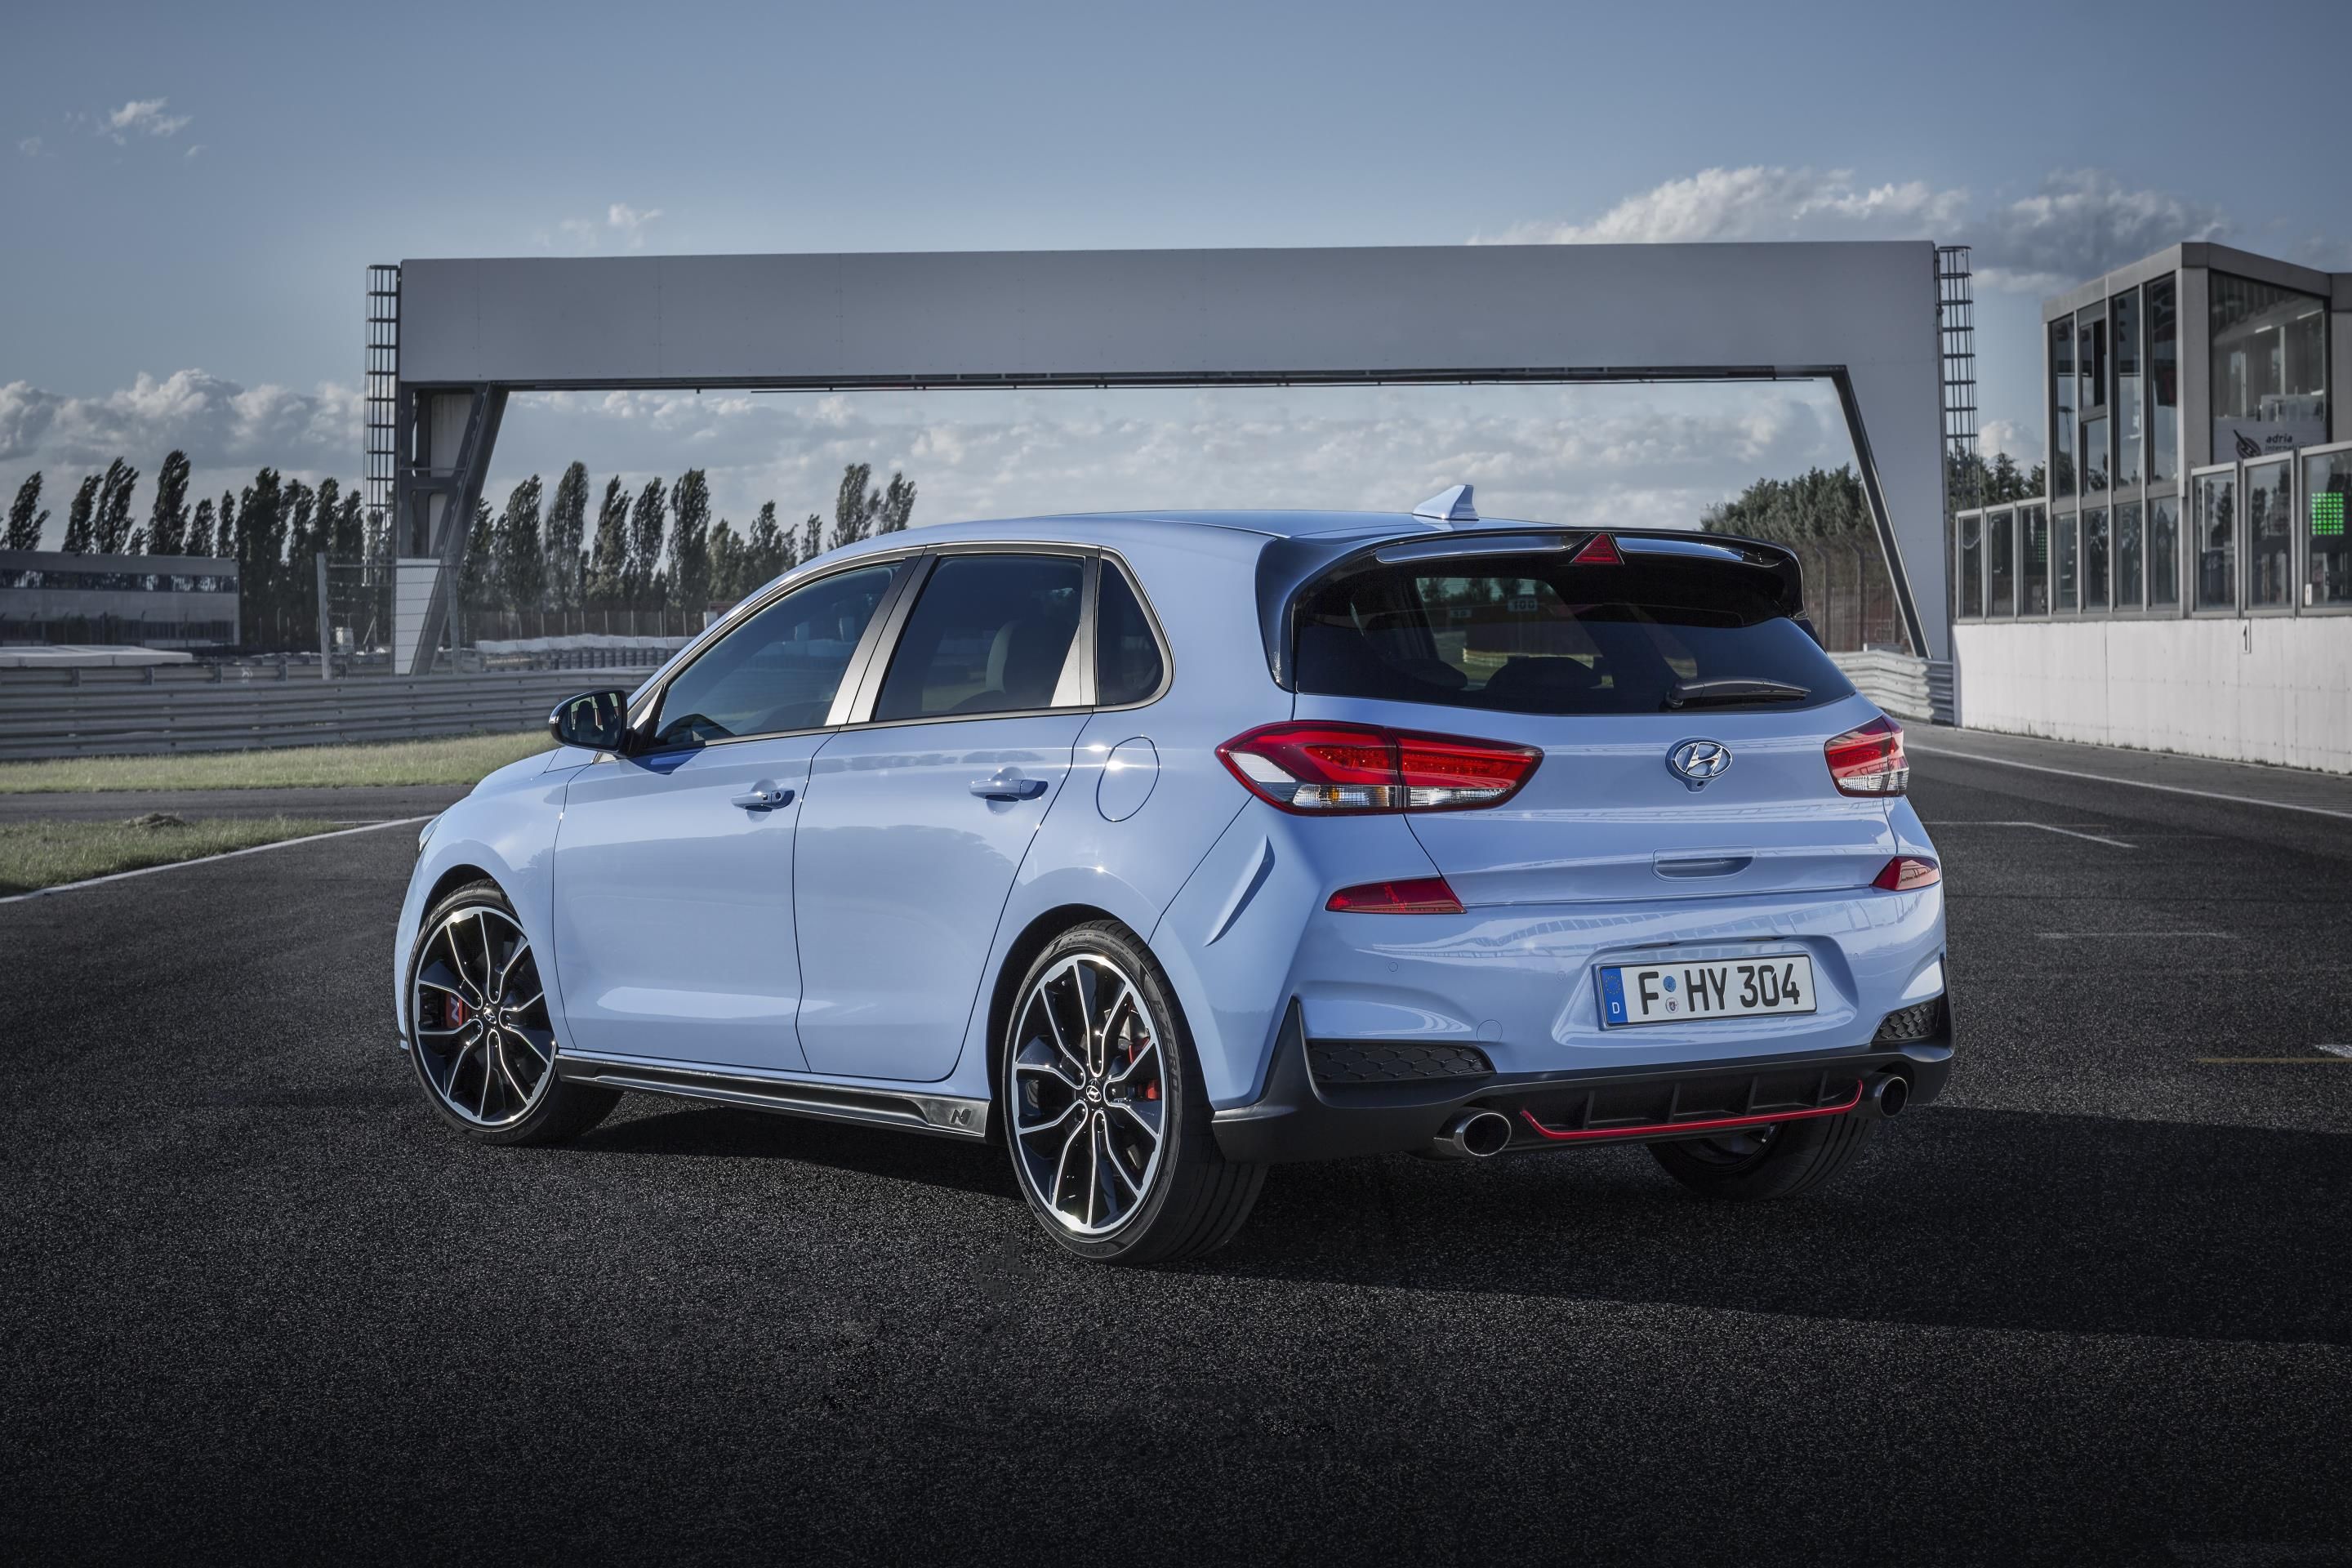 Hyundai i30 N Line Looks Like A Hot Hatch, But It's Not